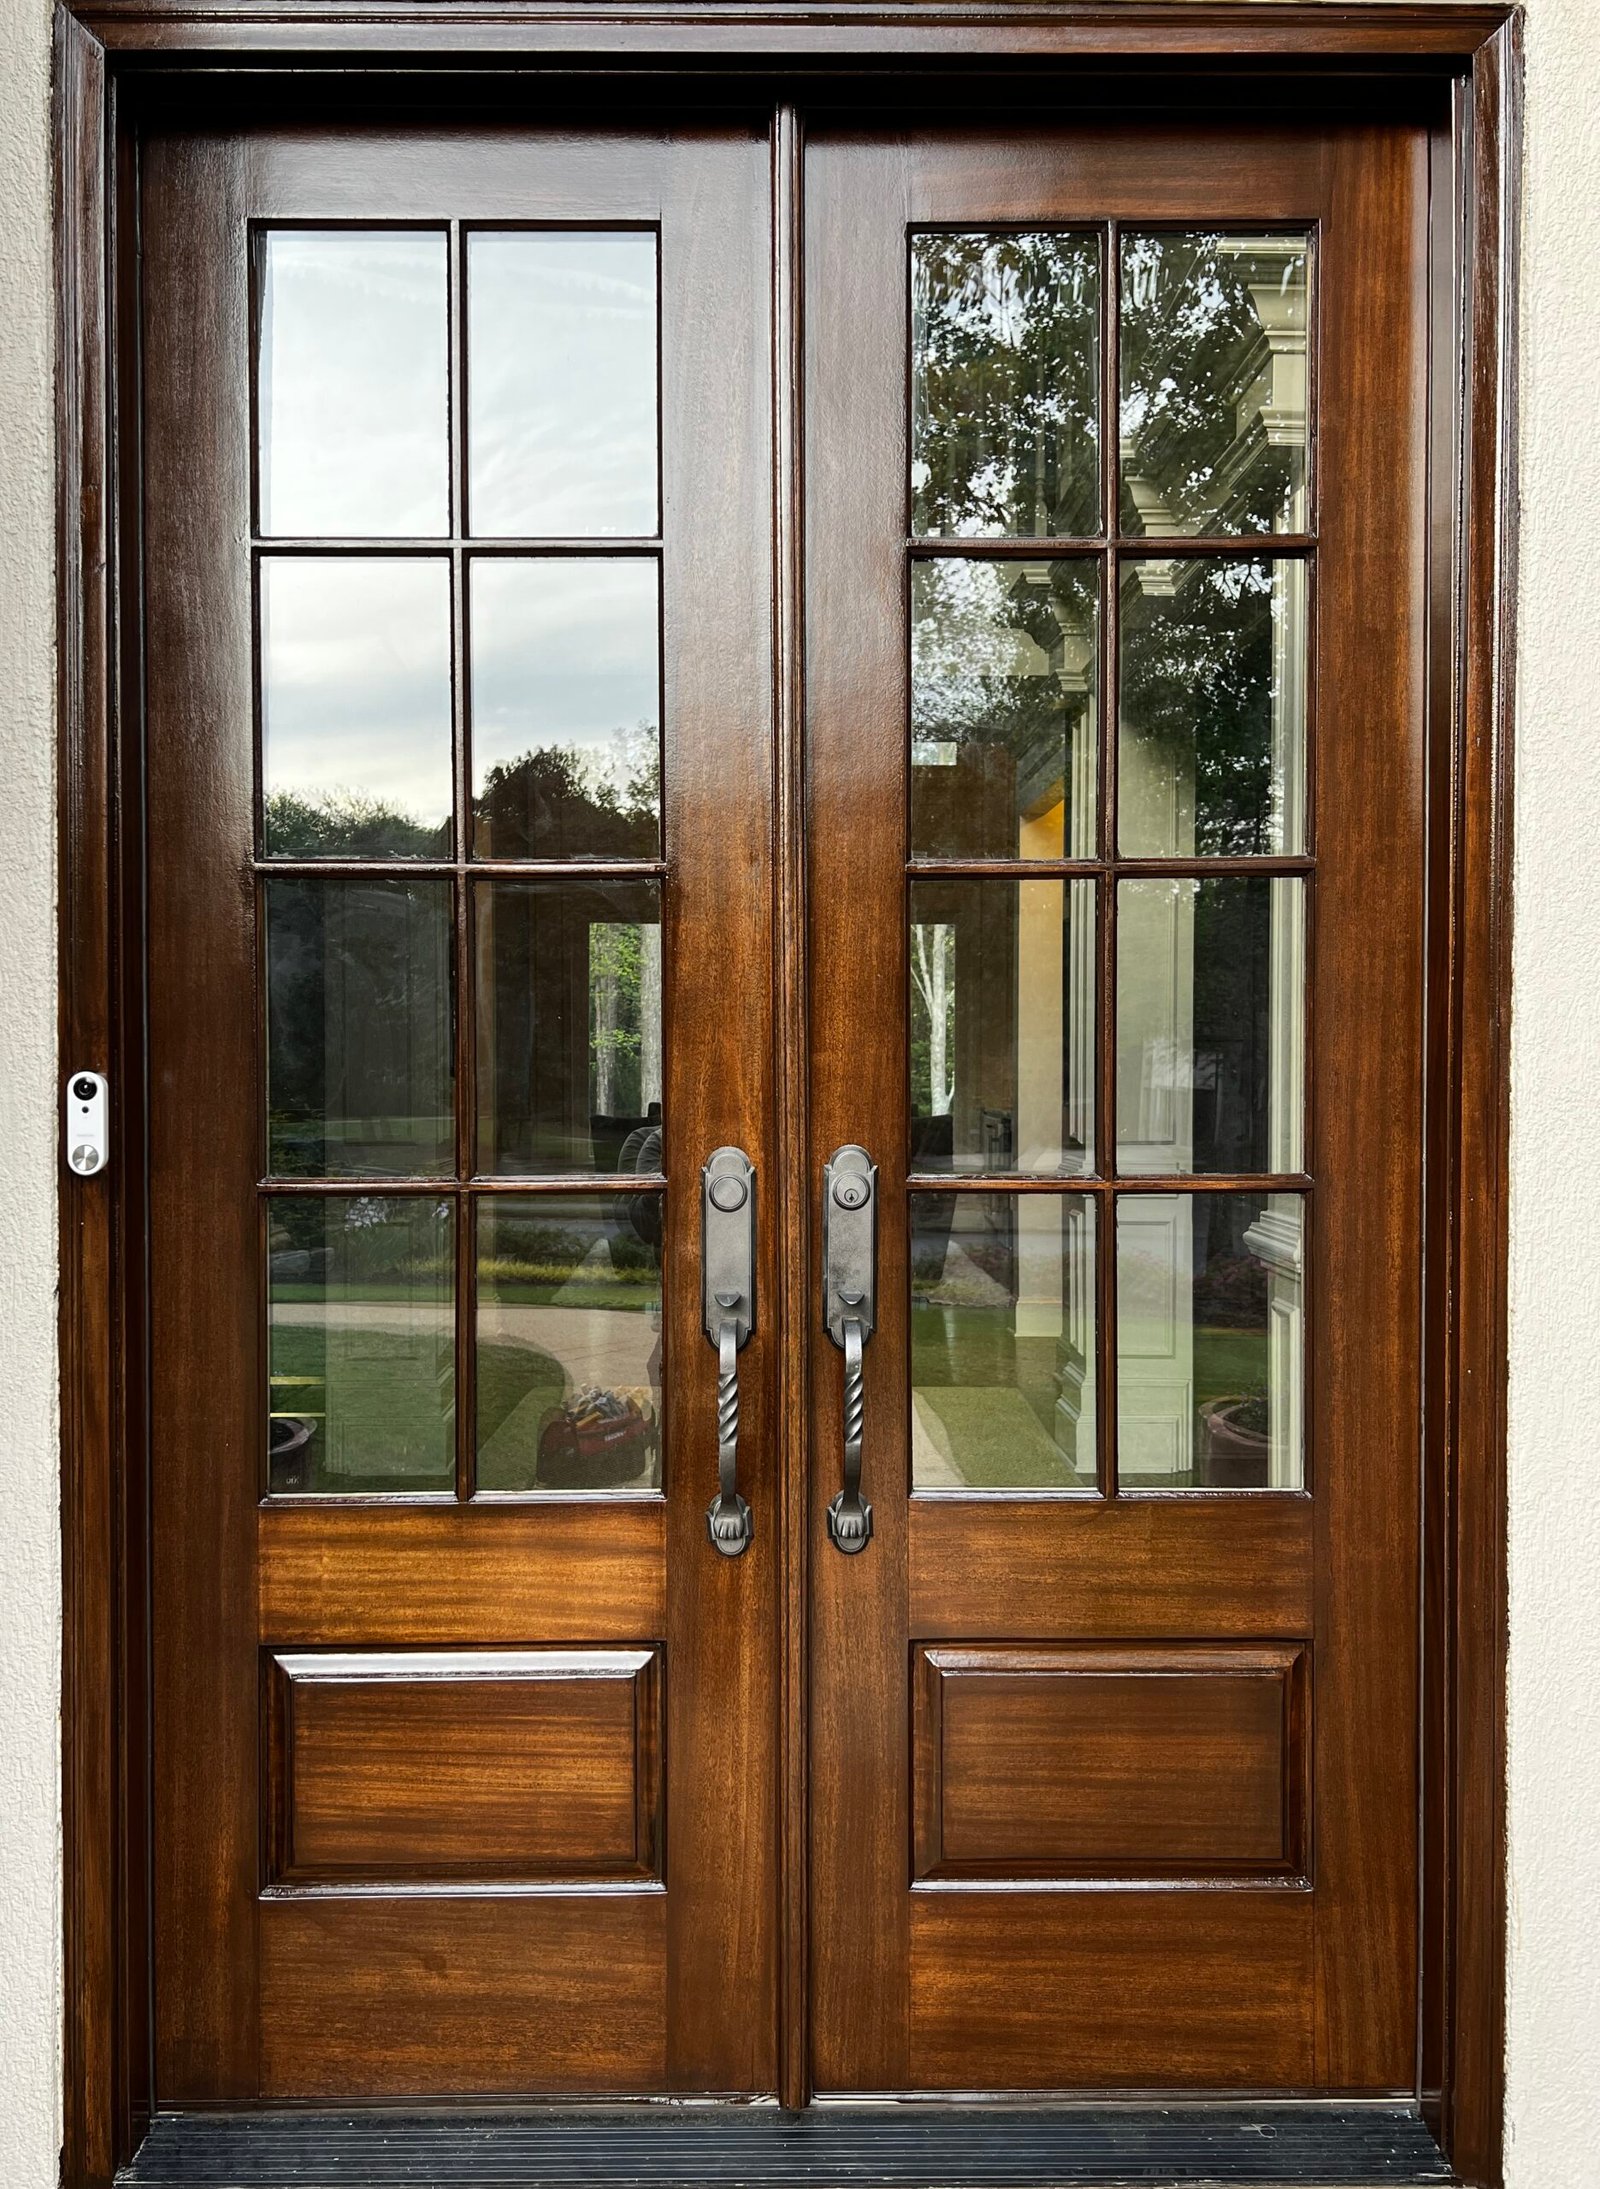 New wooden door with a pristine finish